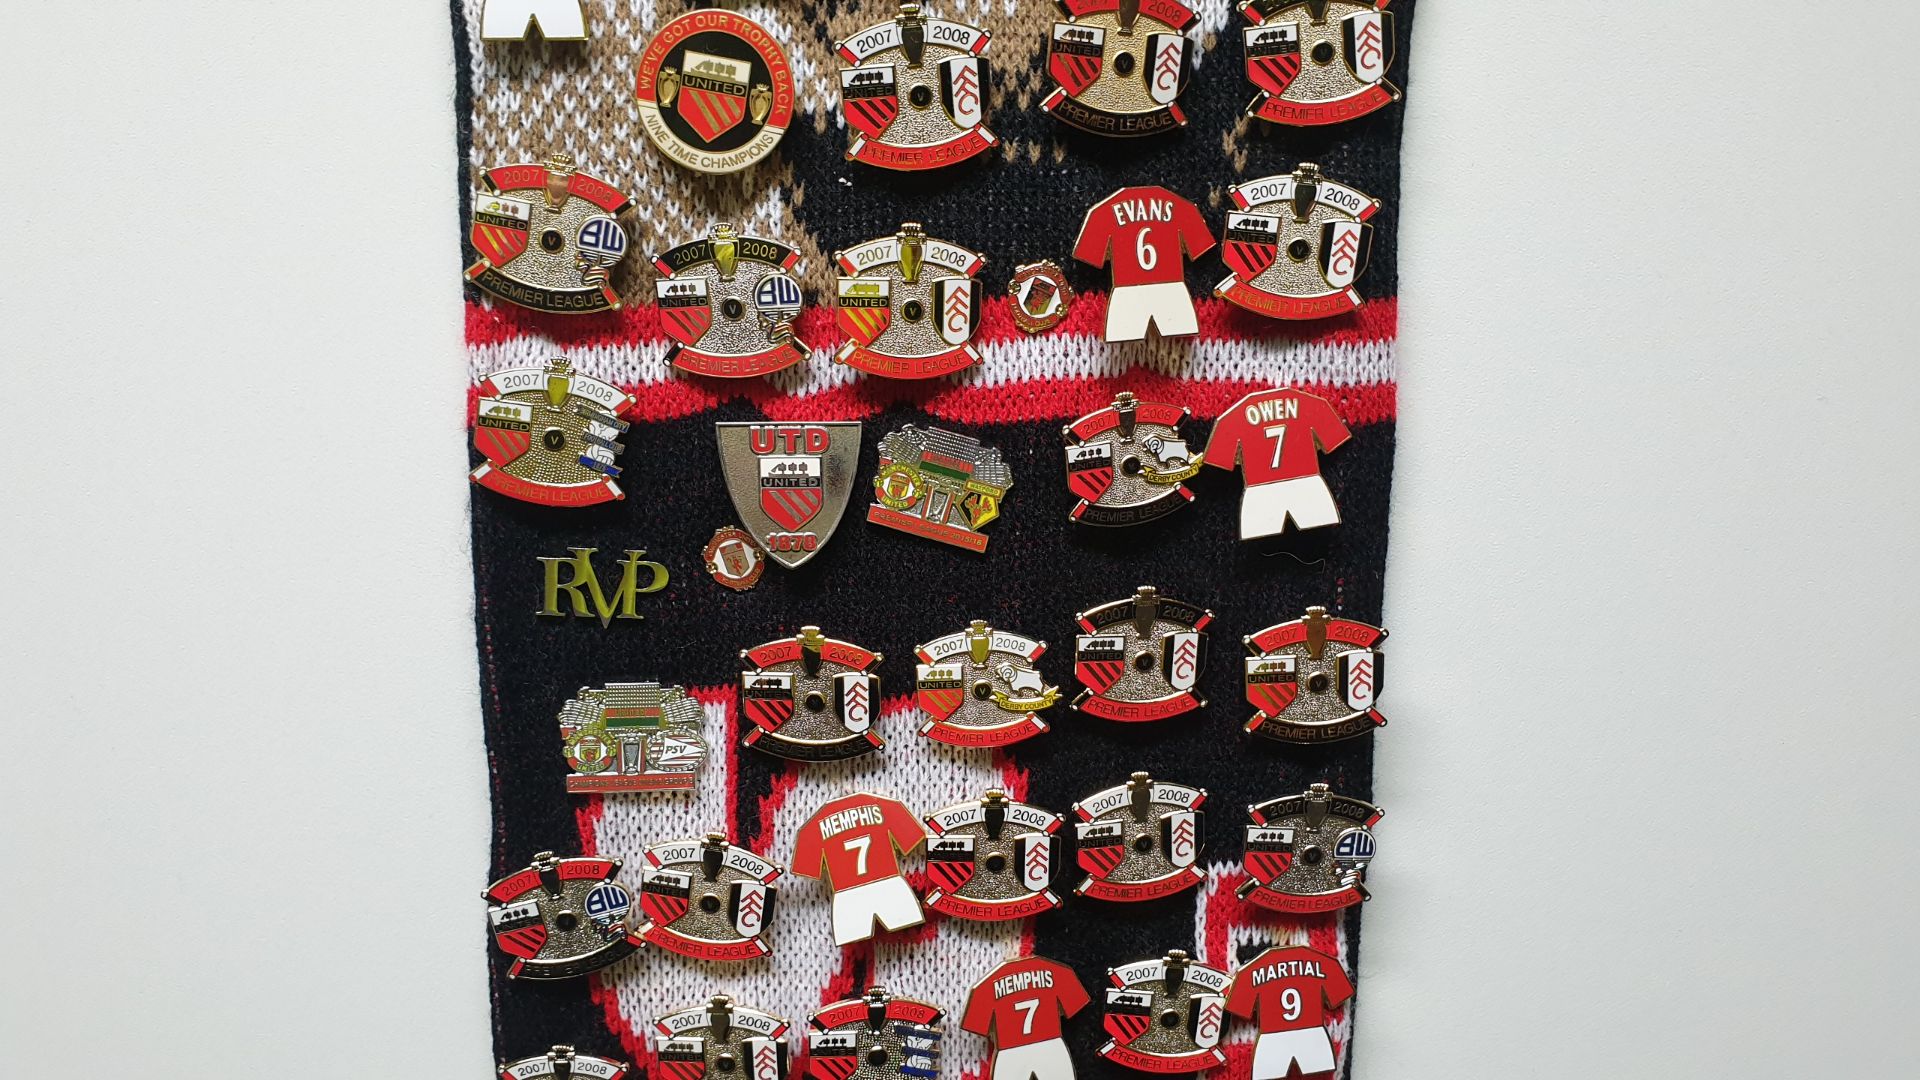 MANCHESTER UNITED SCARF CONTAINING APPROX 220 X PIN BADGES IE FA CUP WINNERS 2004, RVP, UNITED V - Image 3 of 8